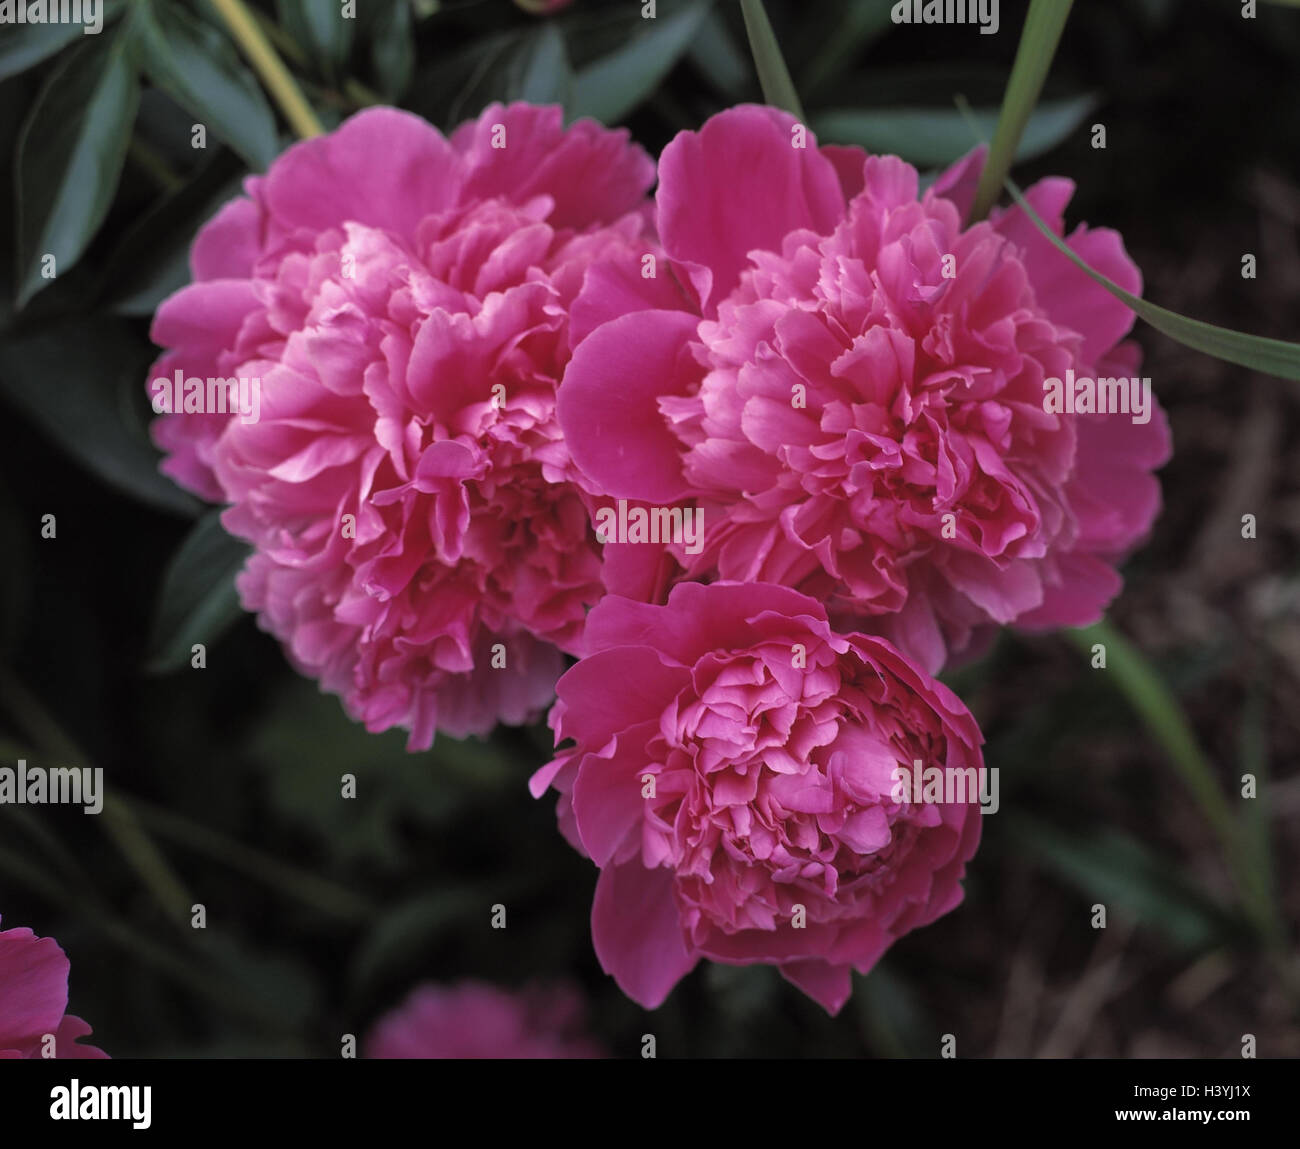 Peonies, Paeonia officinalis, plant, plants, flower, flowers, medicinal plants, medicinal plants, herbs, medicament plants, nature drugs, herb, peony plants, Paeoniaceae, peony, real peony, pawn peony, pawn rose, gout rose, clap rose, Paeonia, blossoms, p Stock Photo